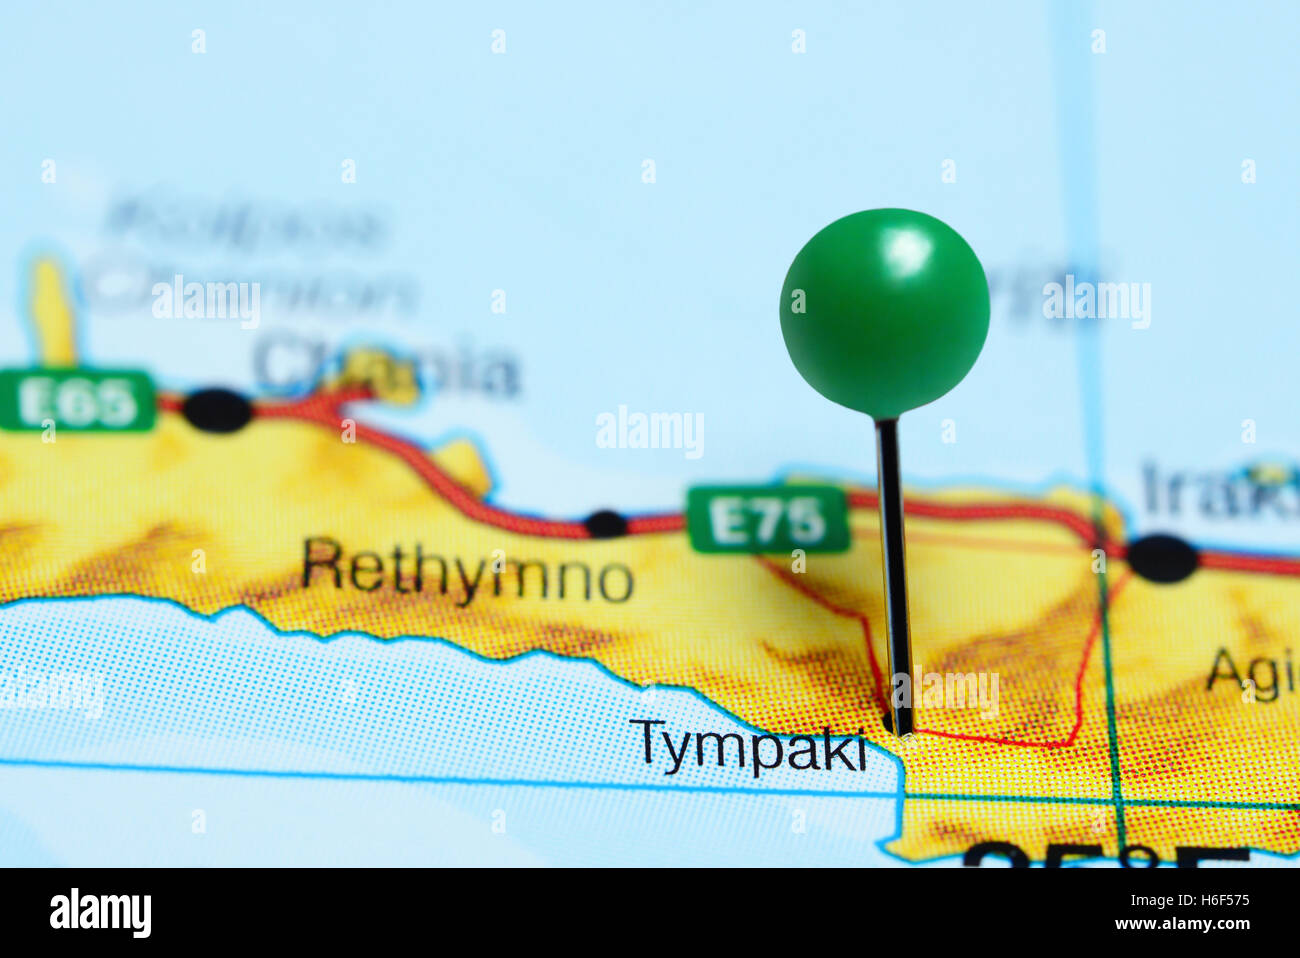 Tympaki pinned on a map of Greece Stock Photo